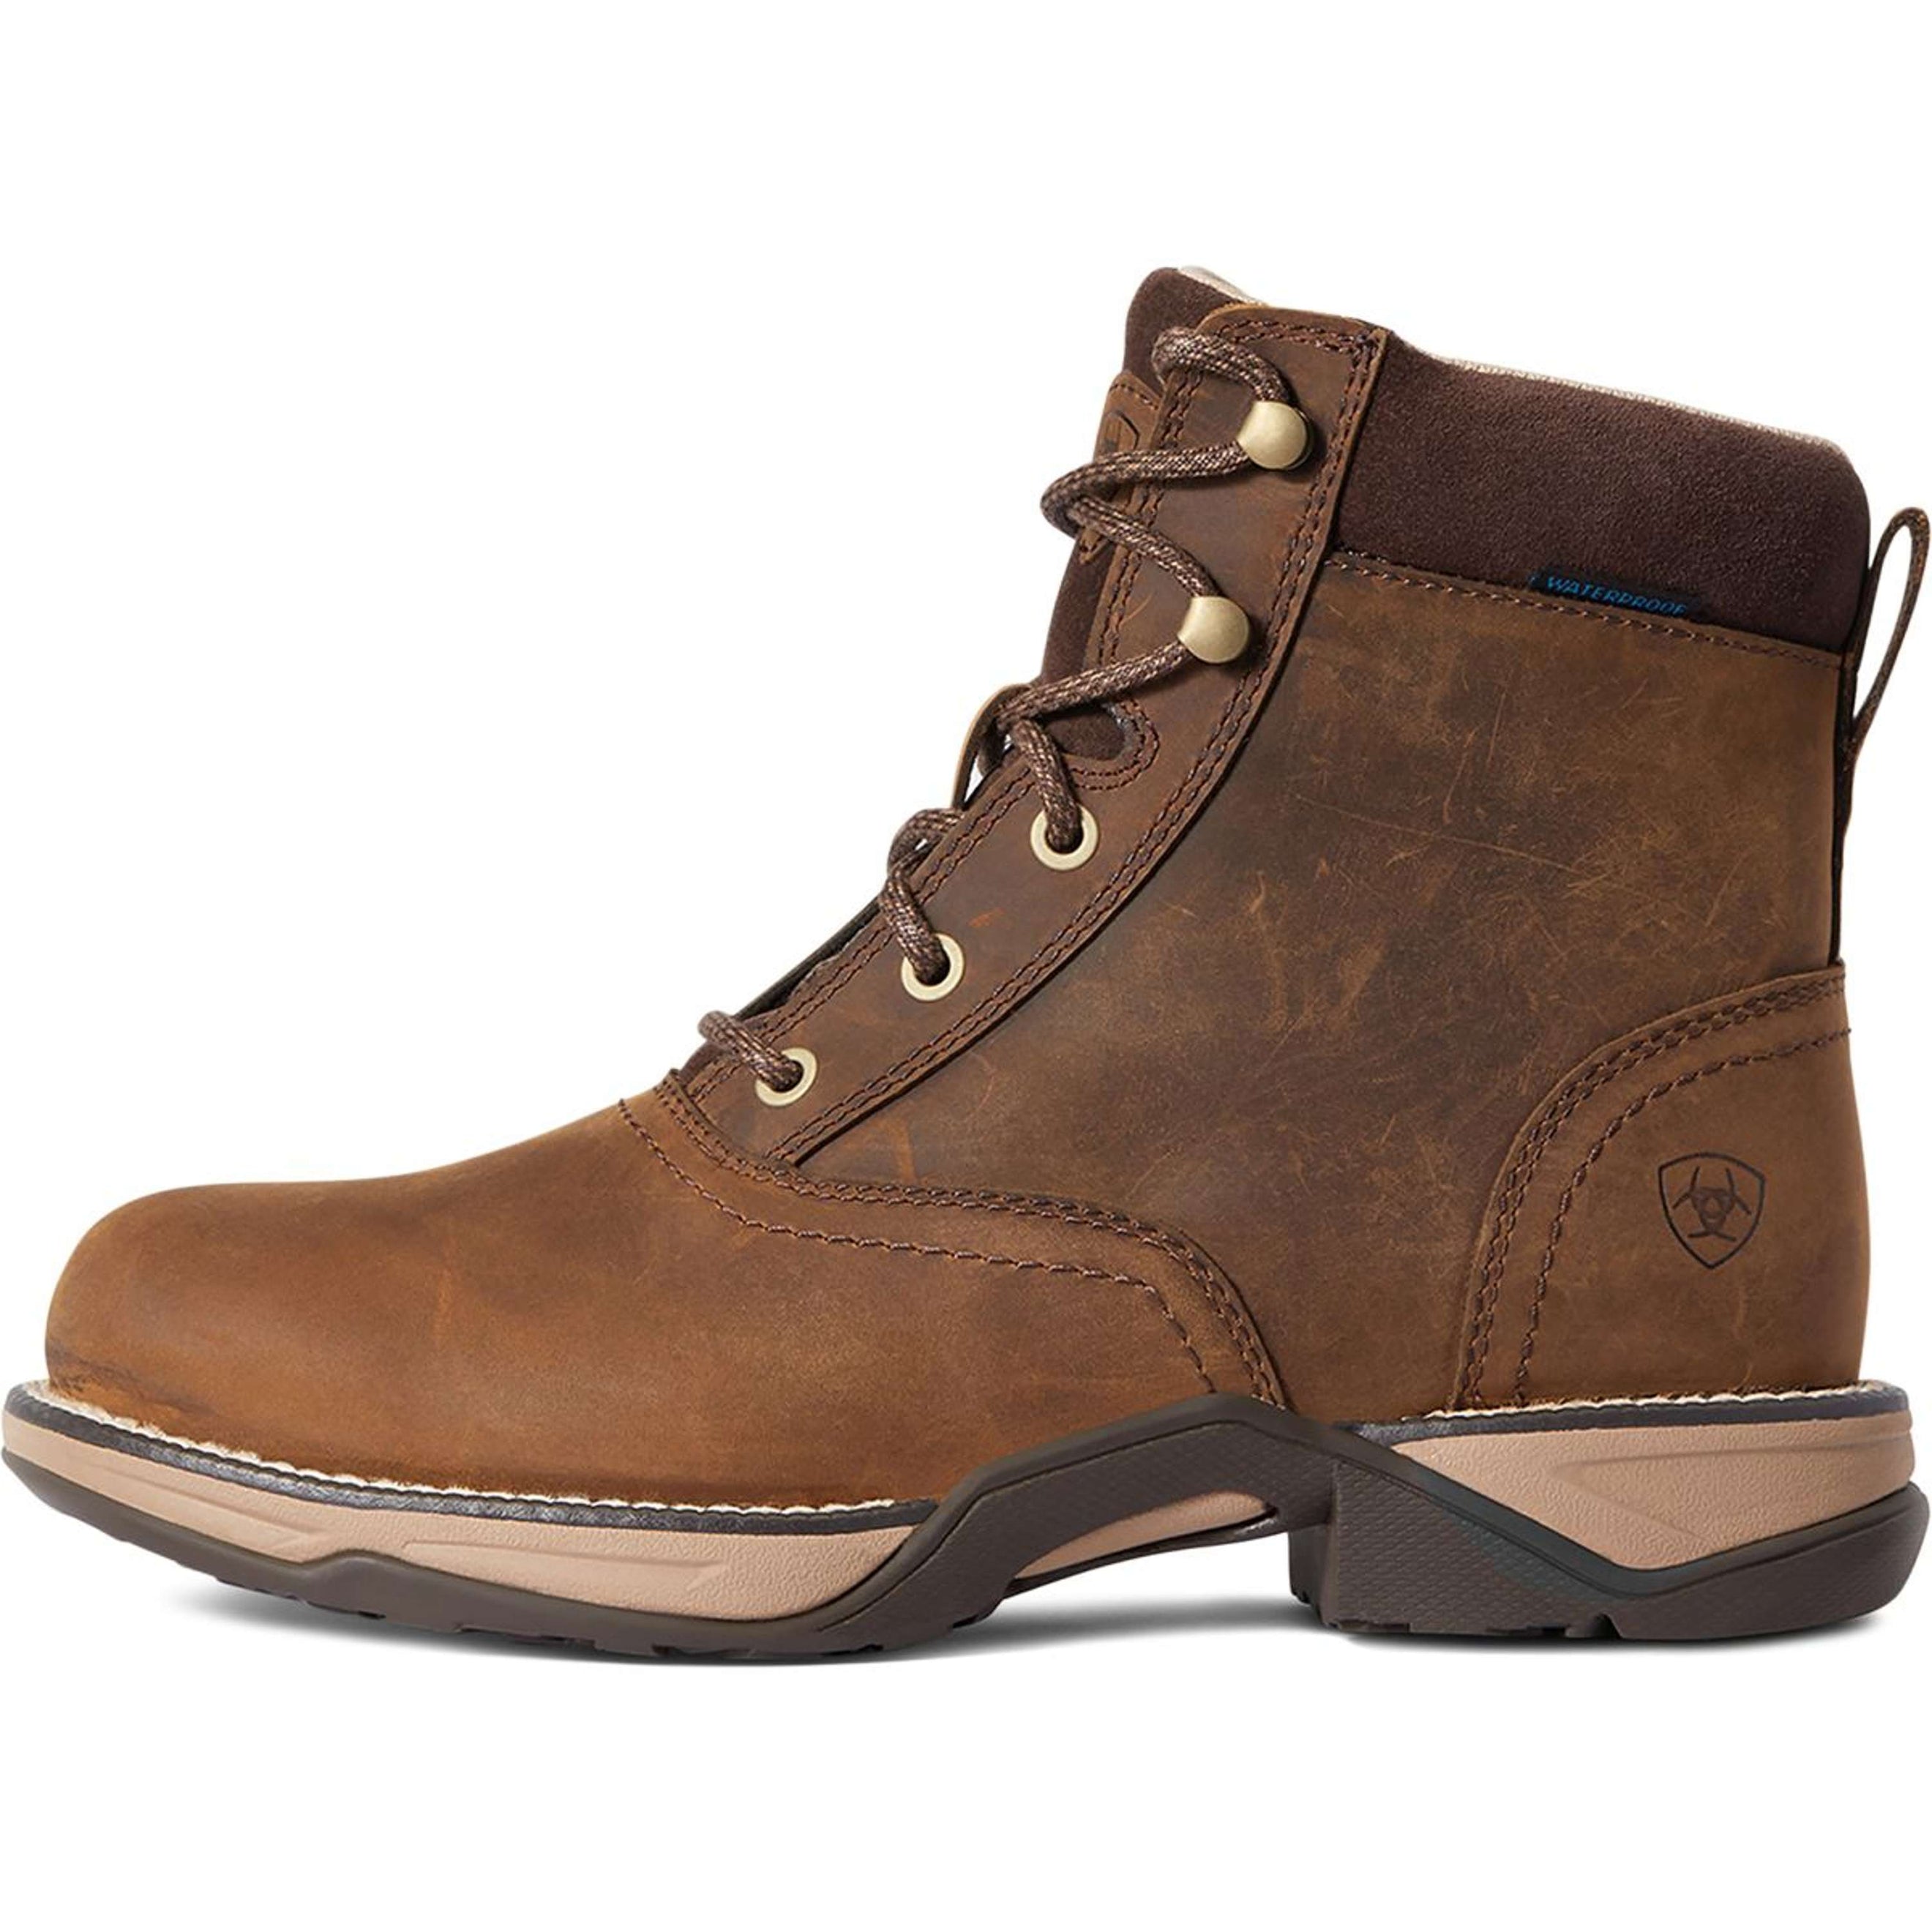 Ariat Anthem Round Toe Lacer H2O Femme Distressed Brown